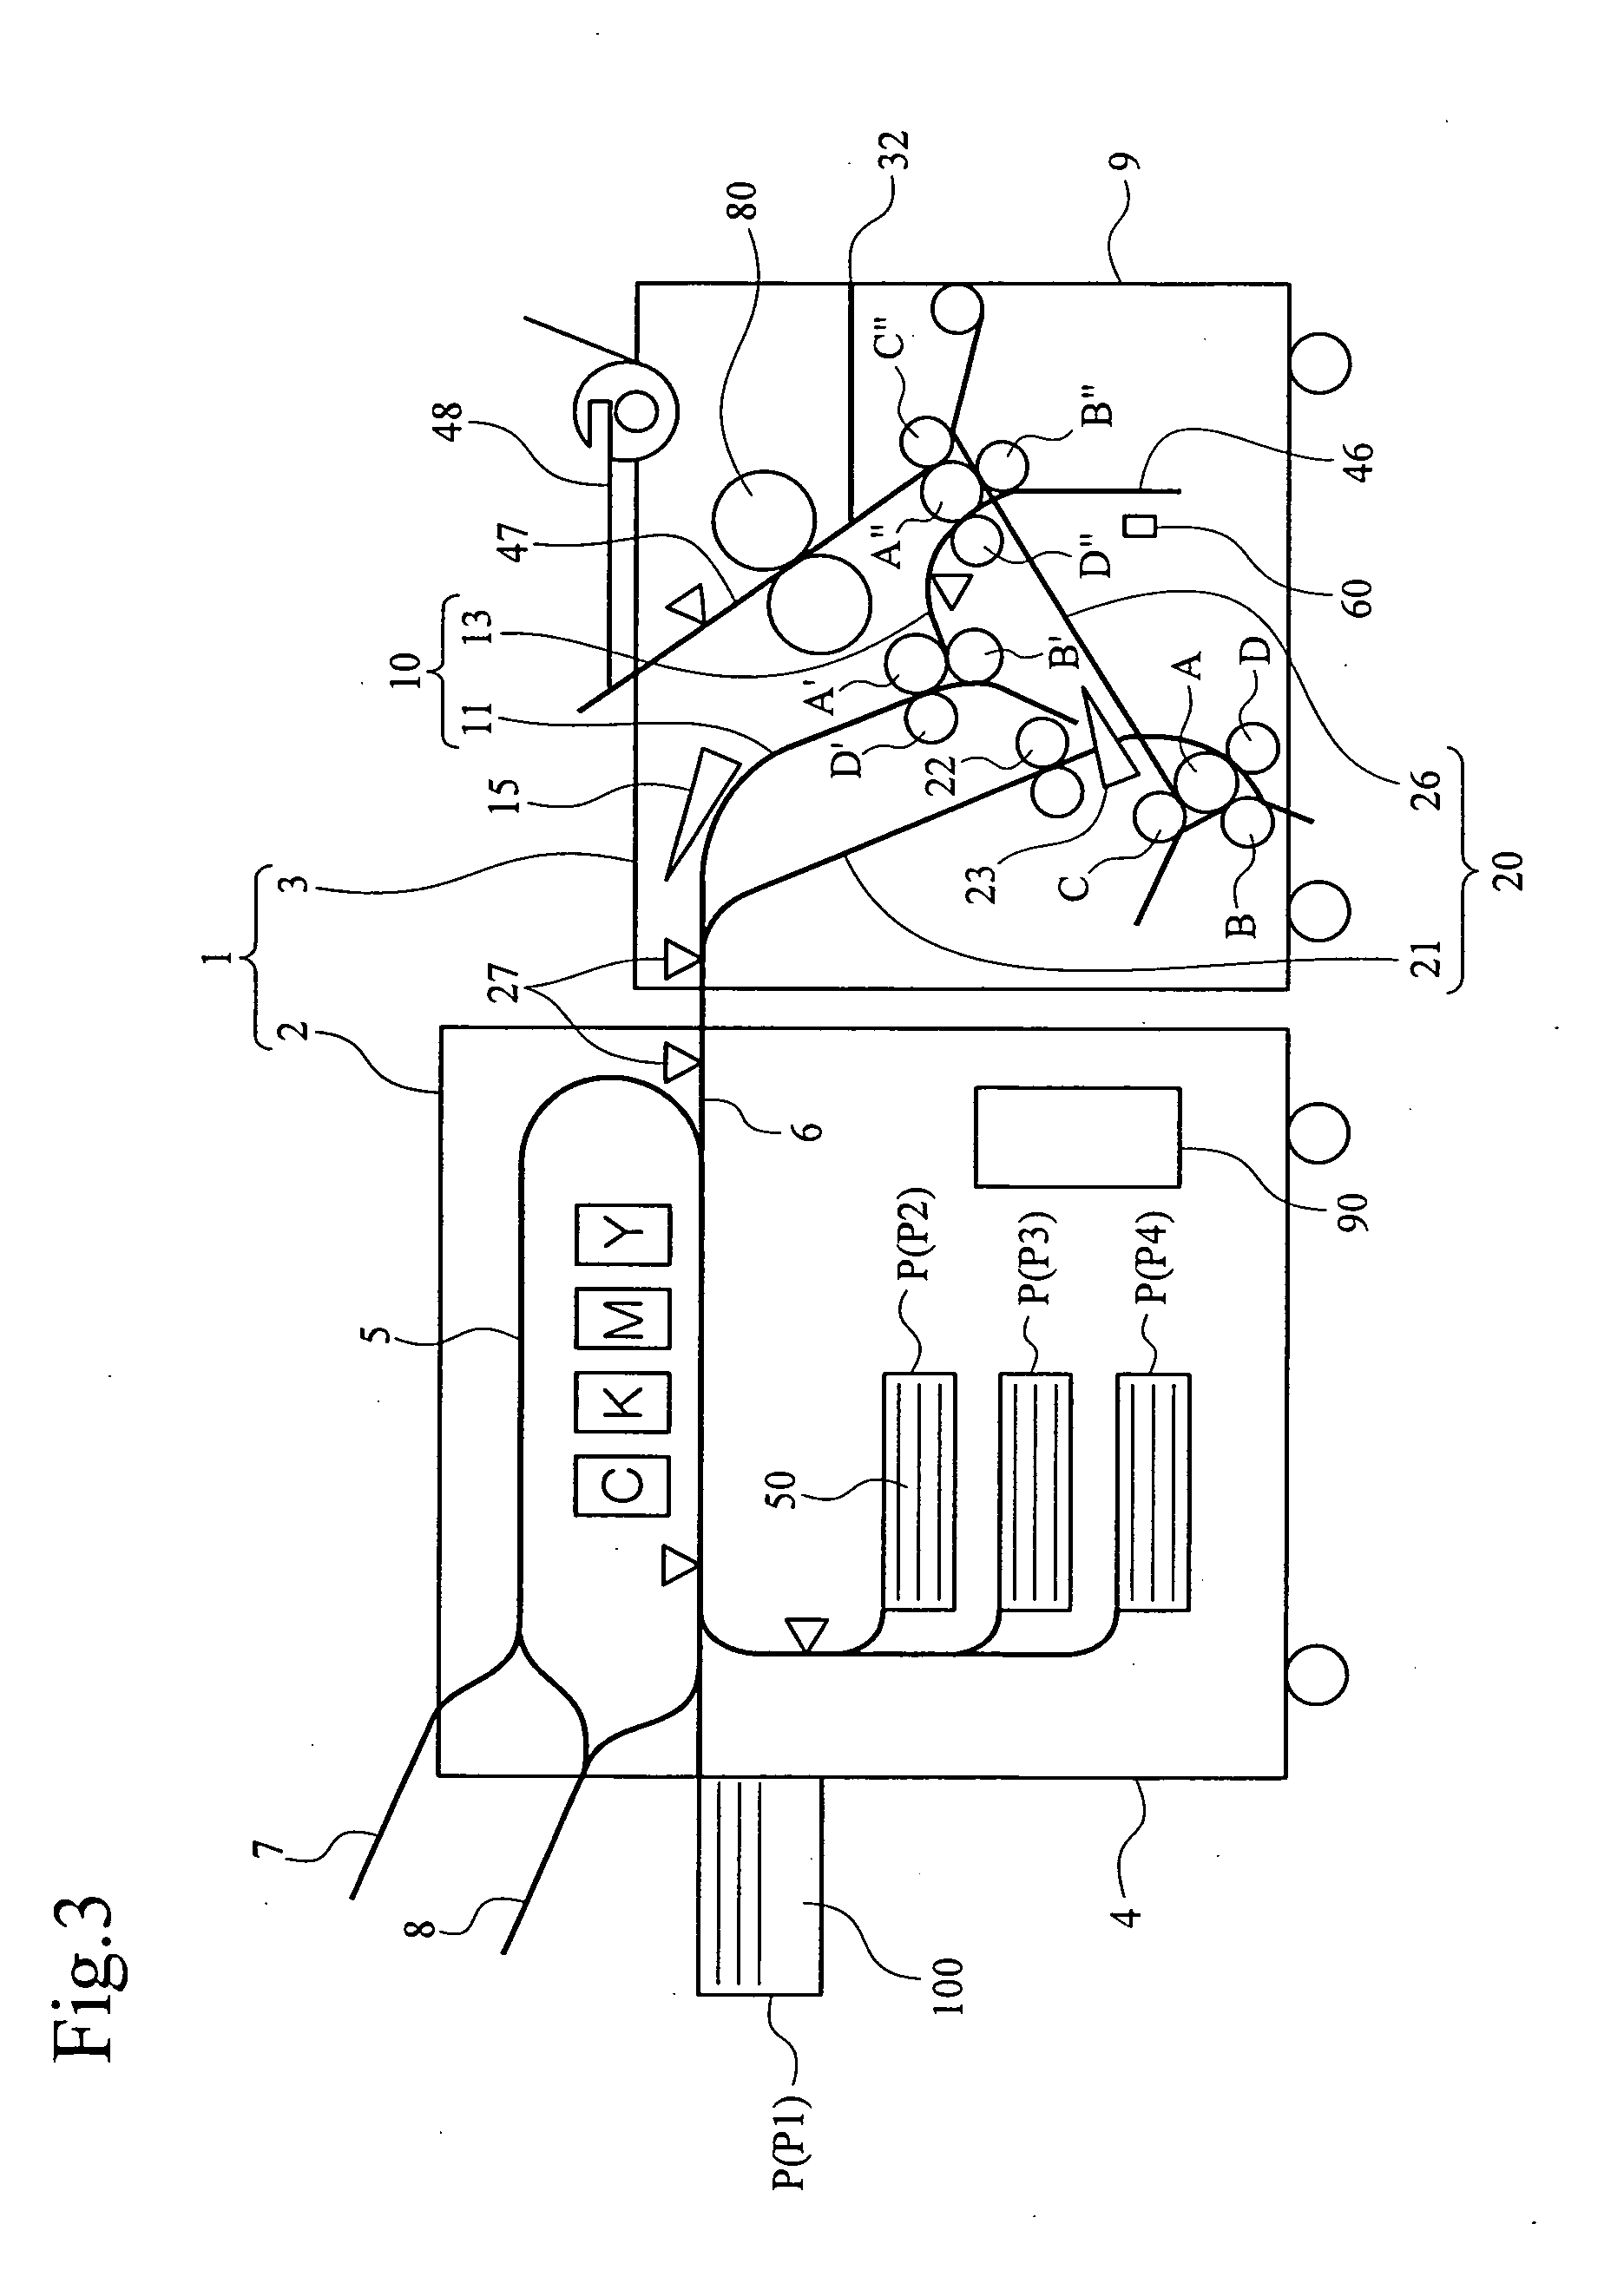 Sealed letter forming apparatus